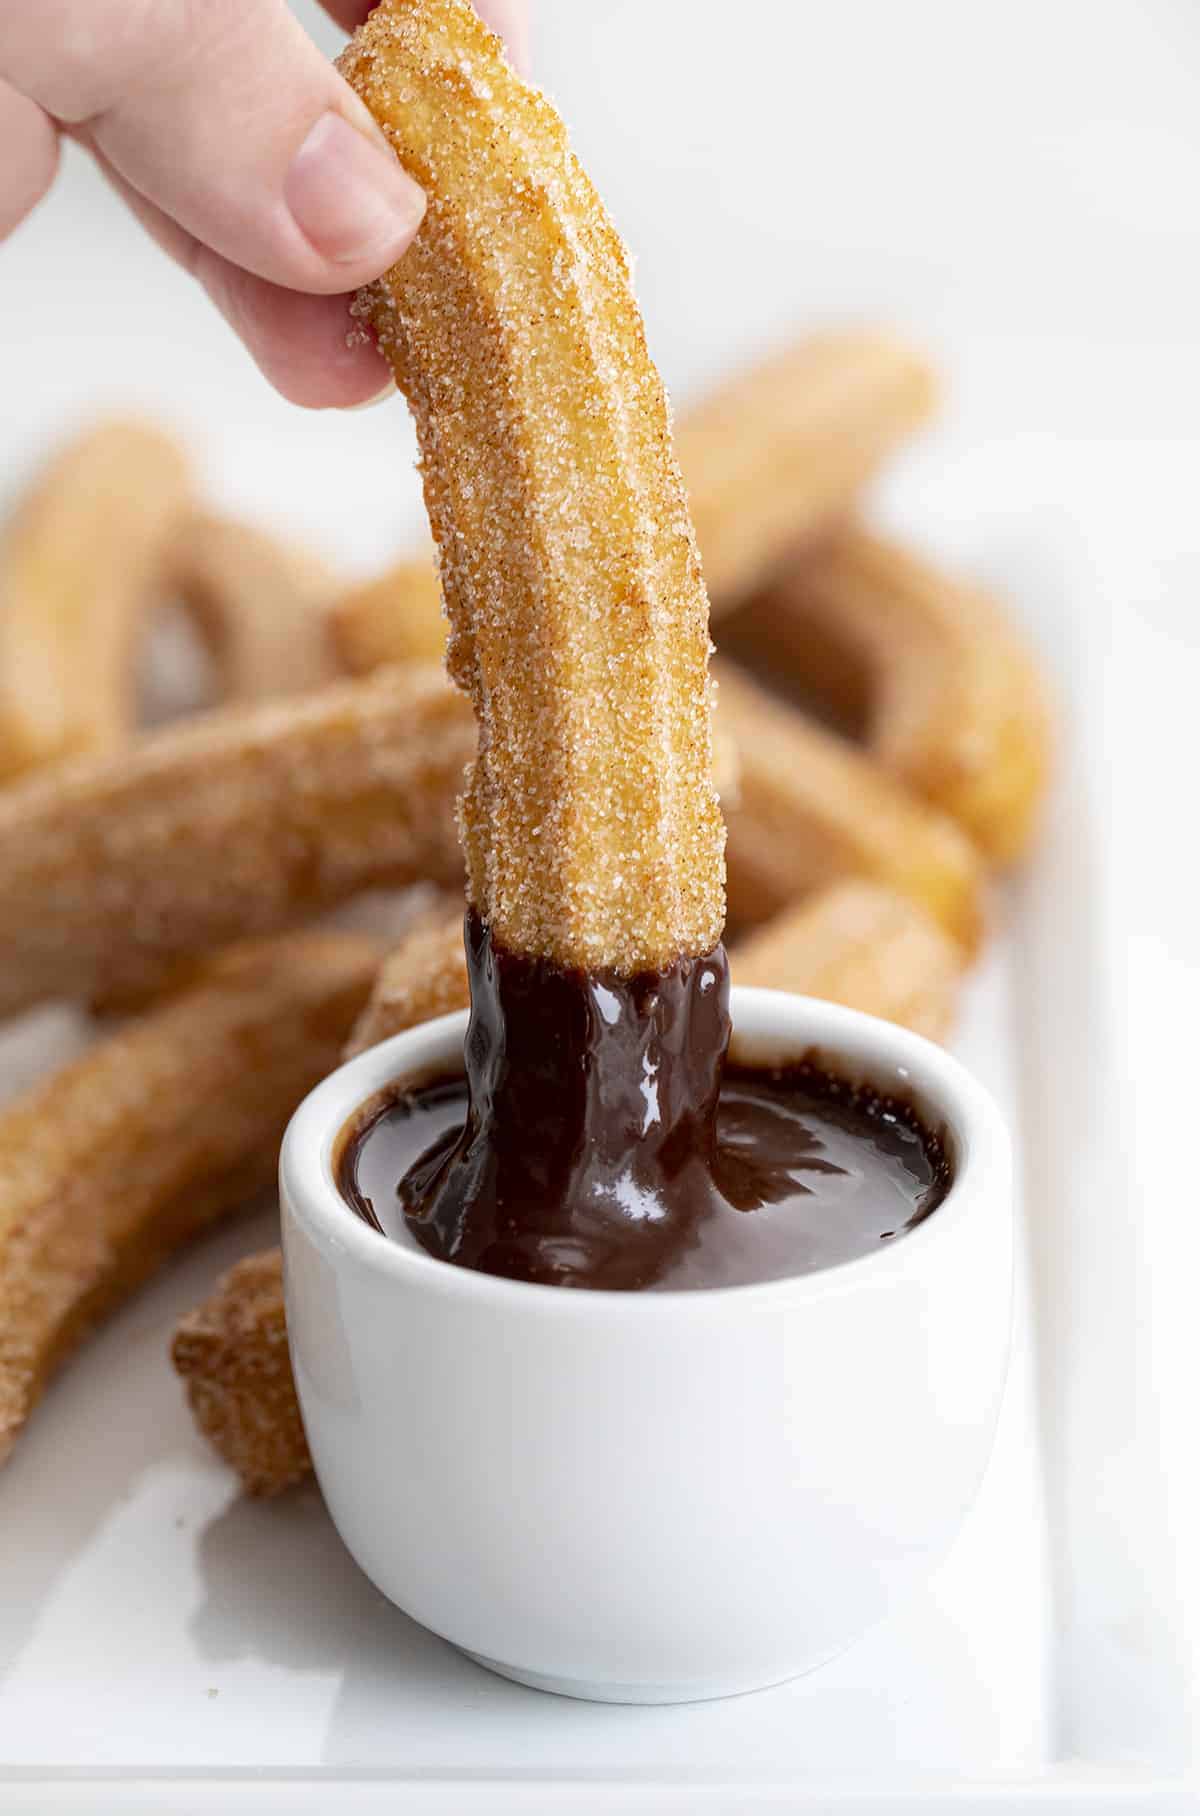 Dipping Churro Into Chocolate 